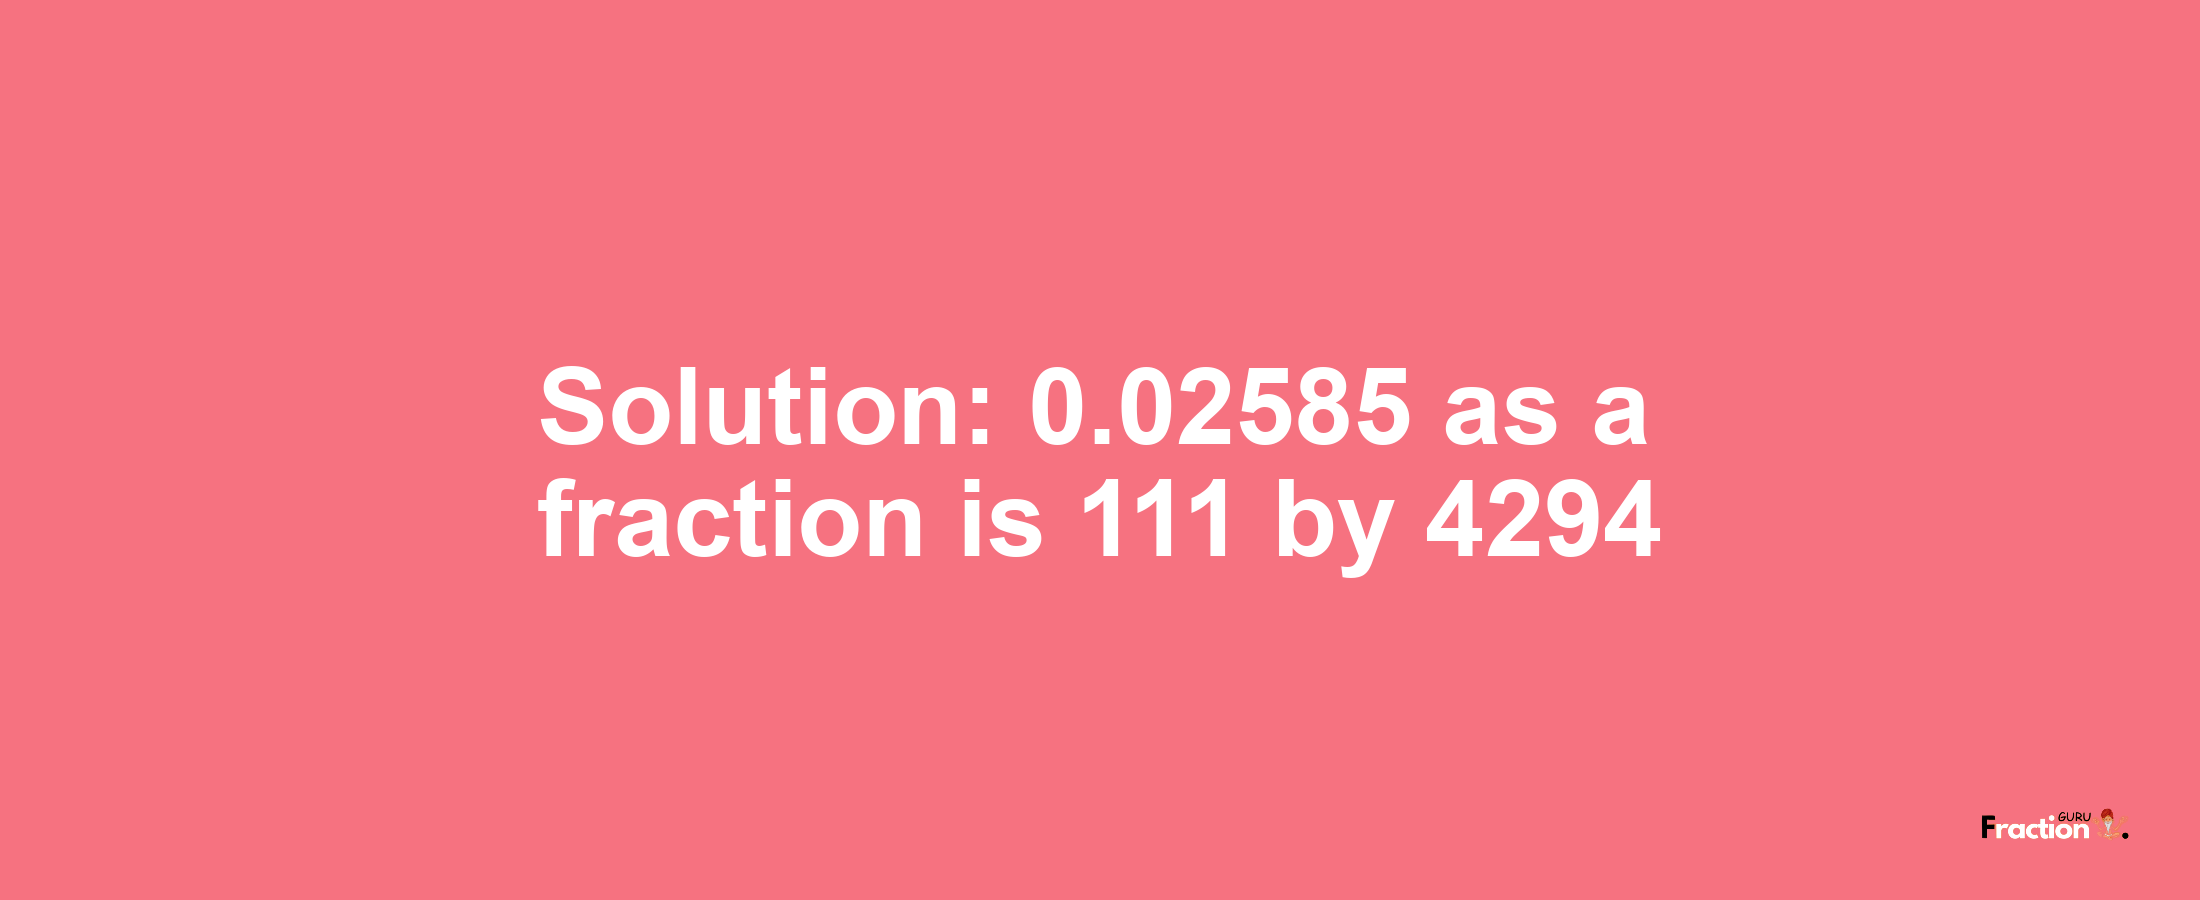 Solution:0.02585 as a fraction is 111/4294